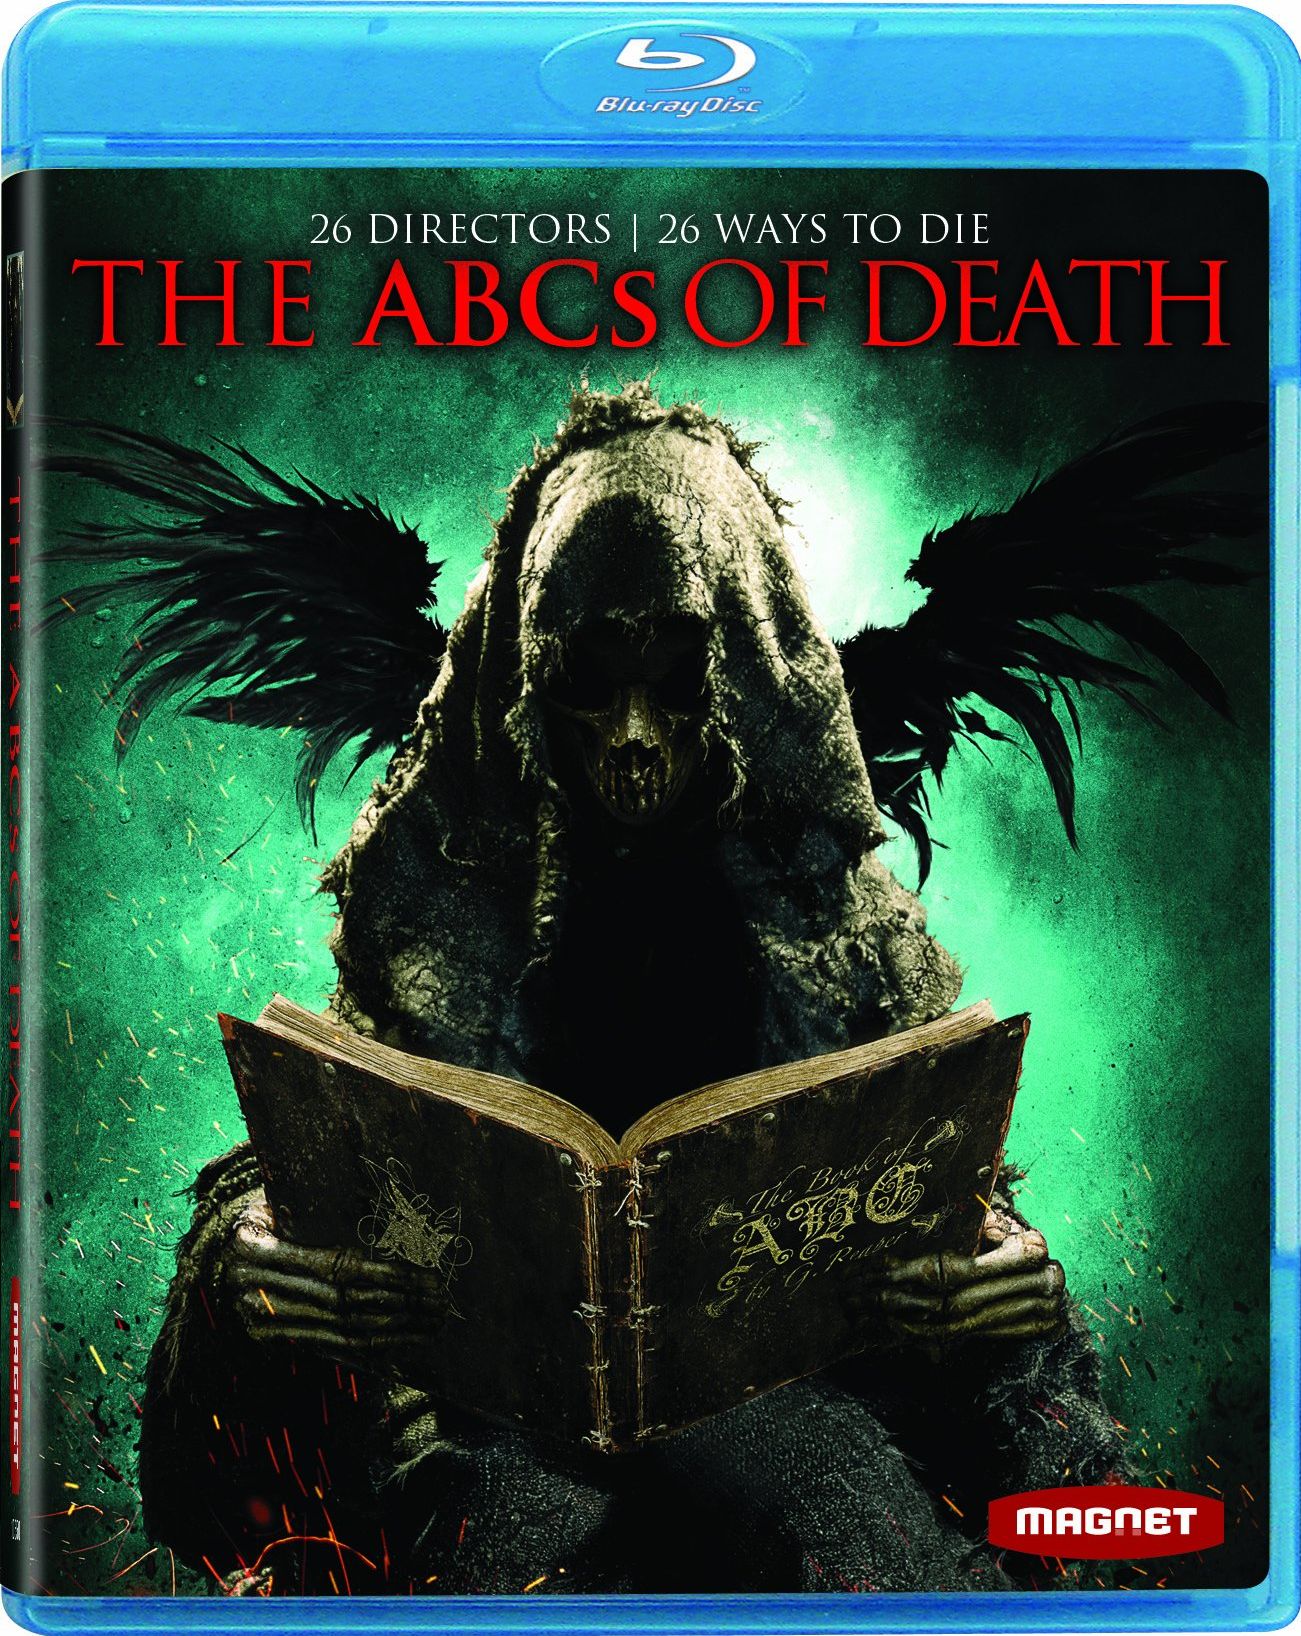 The ABCs of Death is Available on Blu-ray/DVD May 21